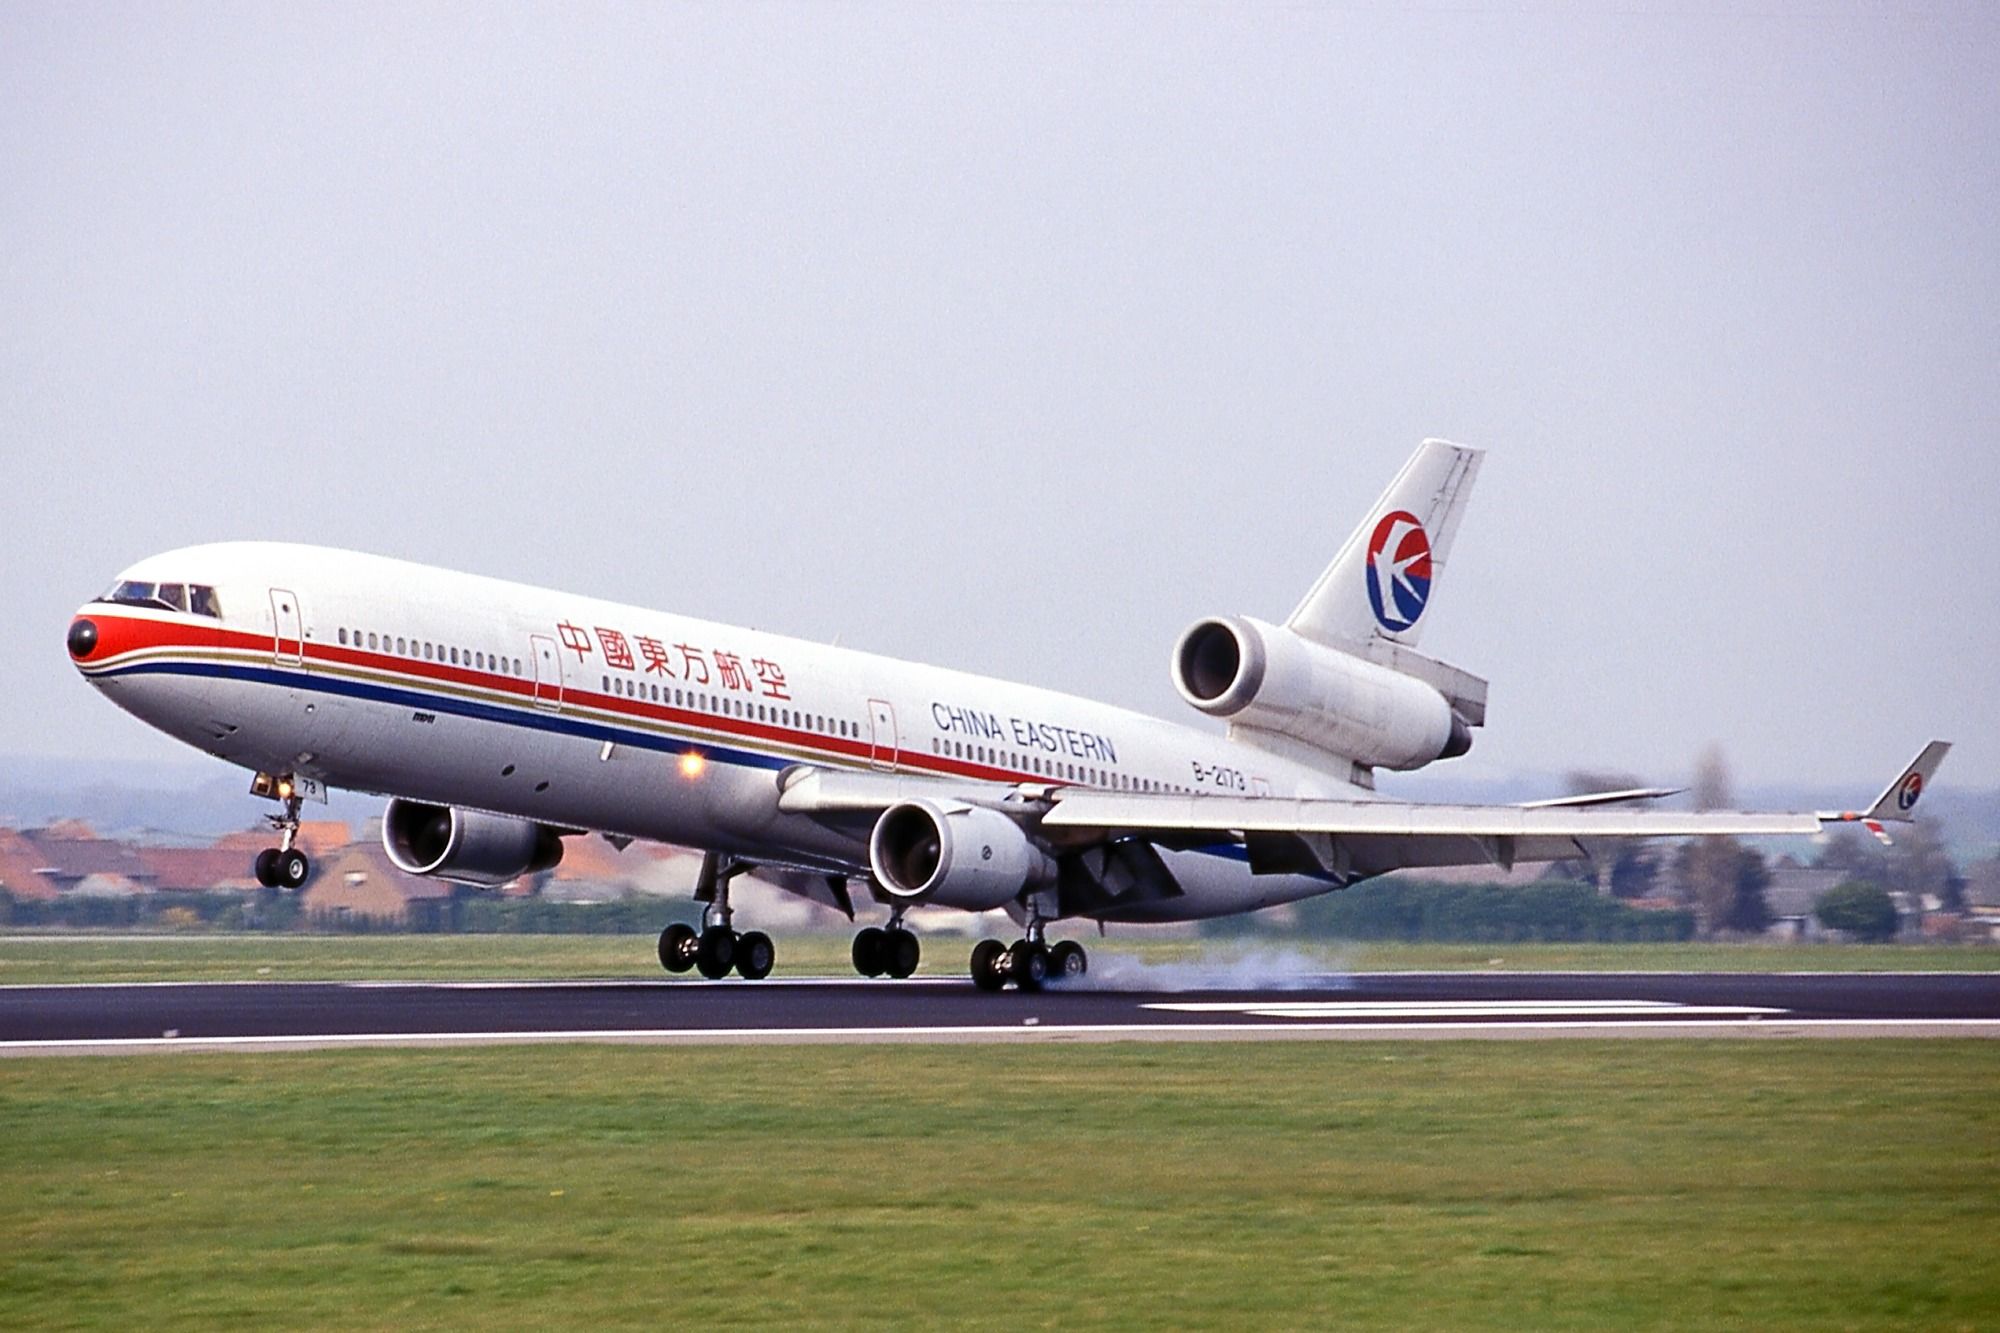 China Eastern Airlines MD-11